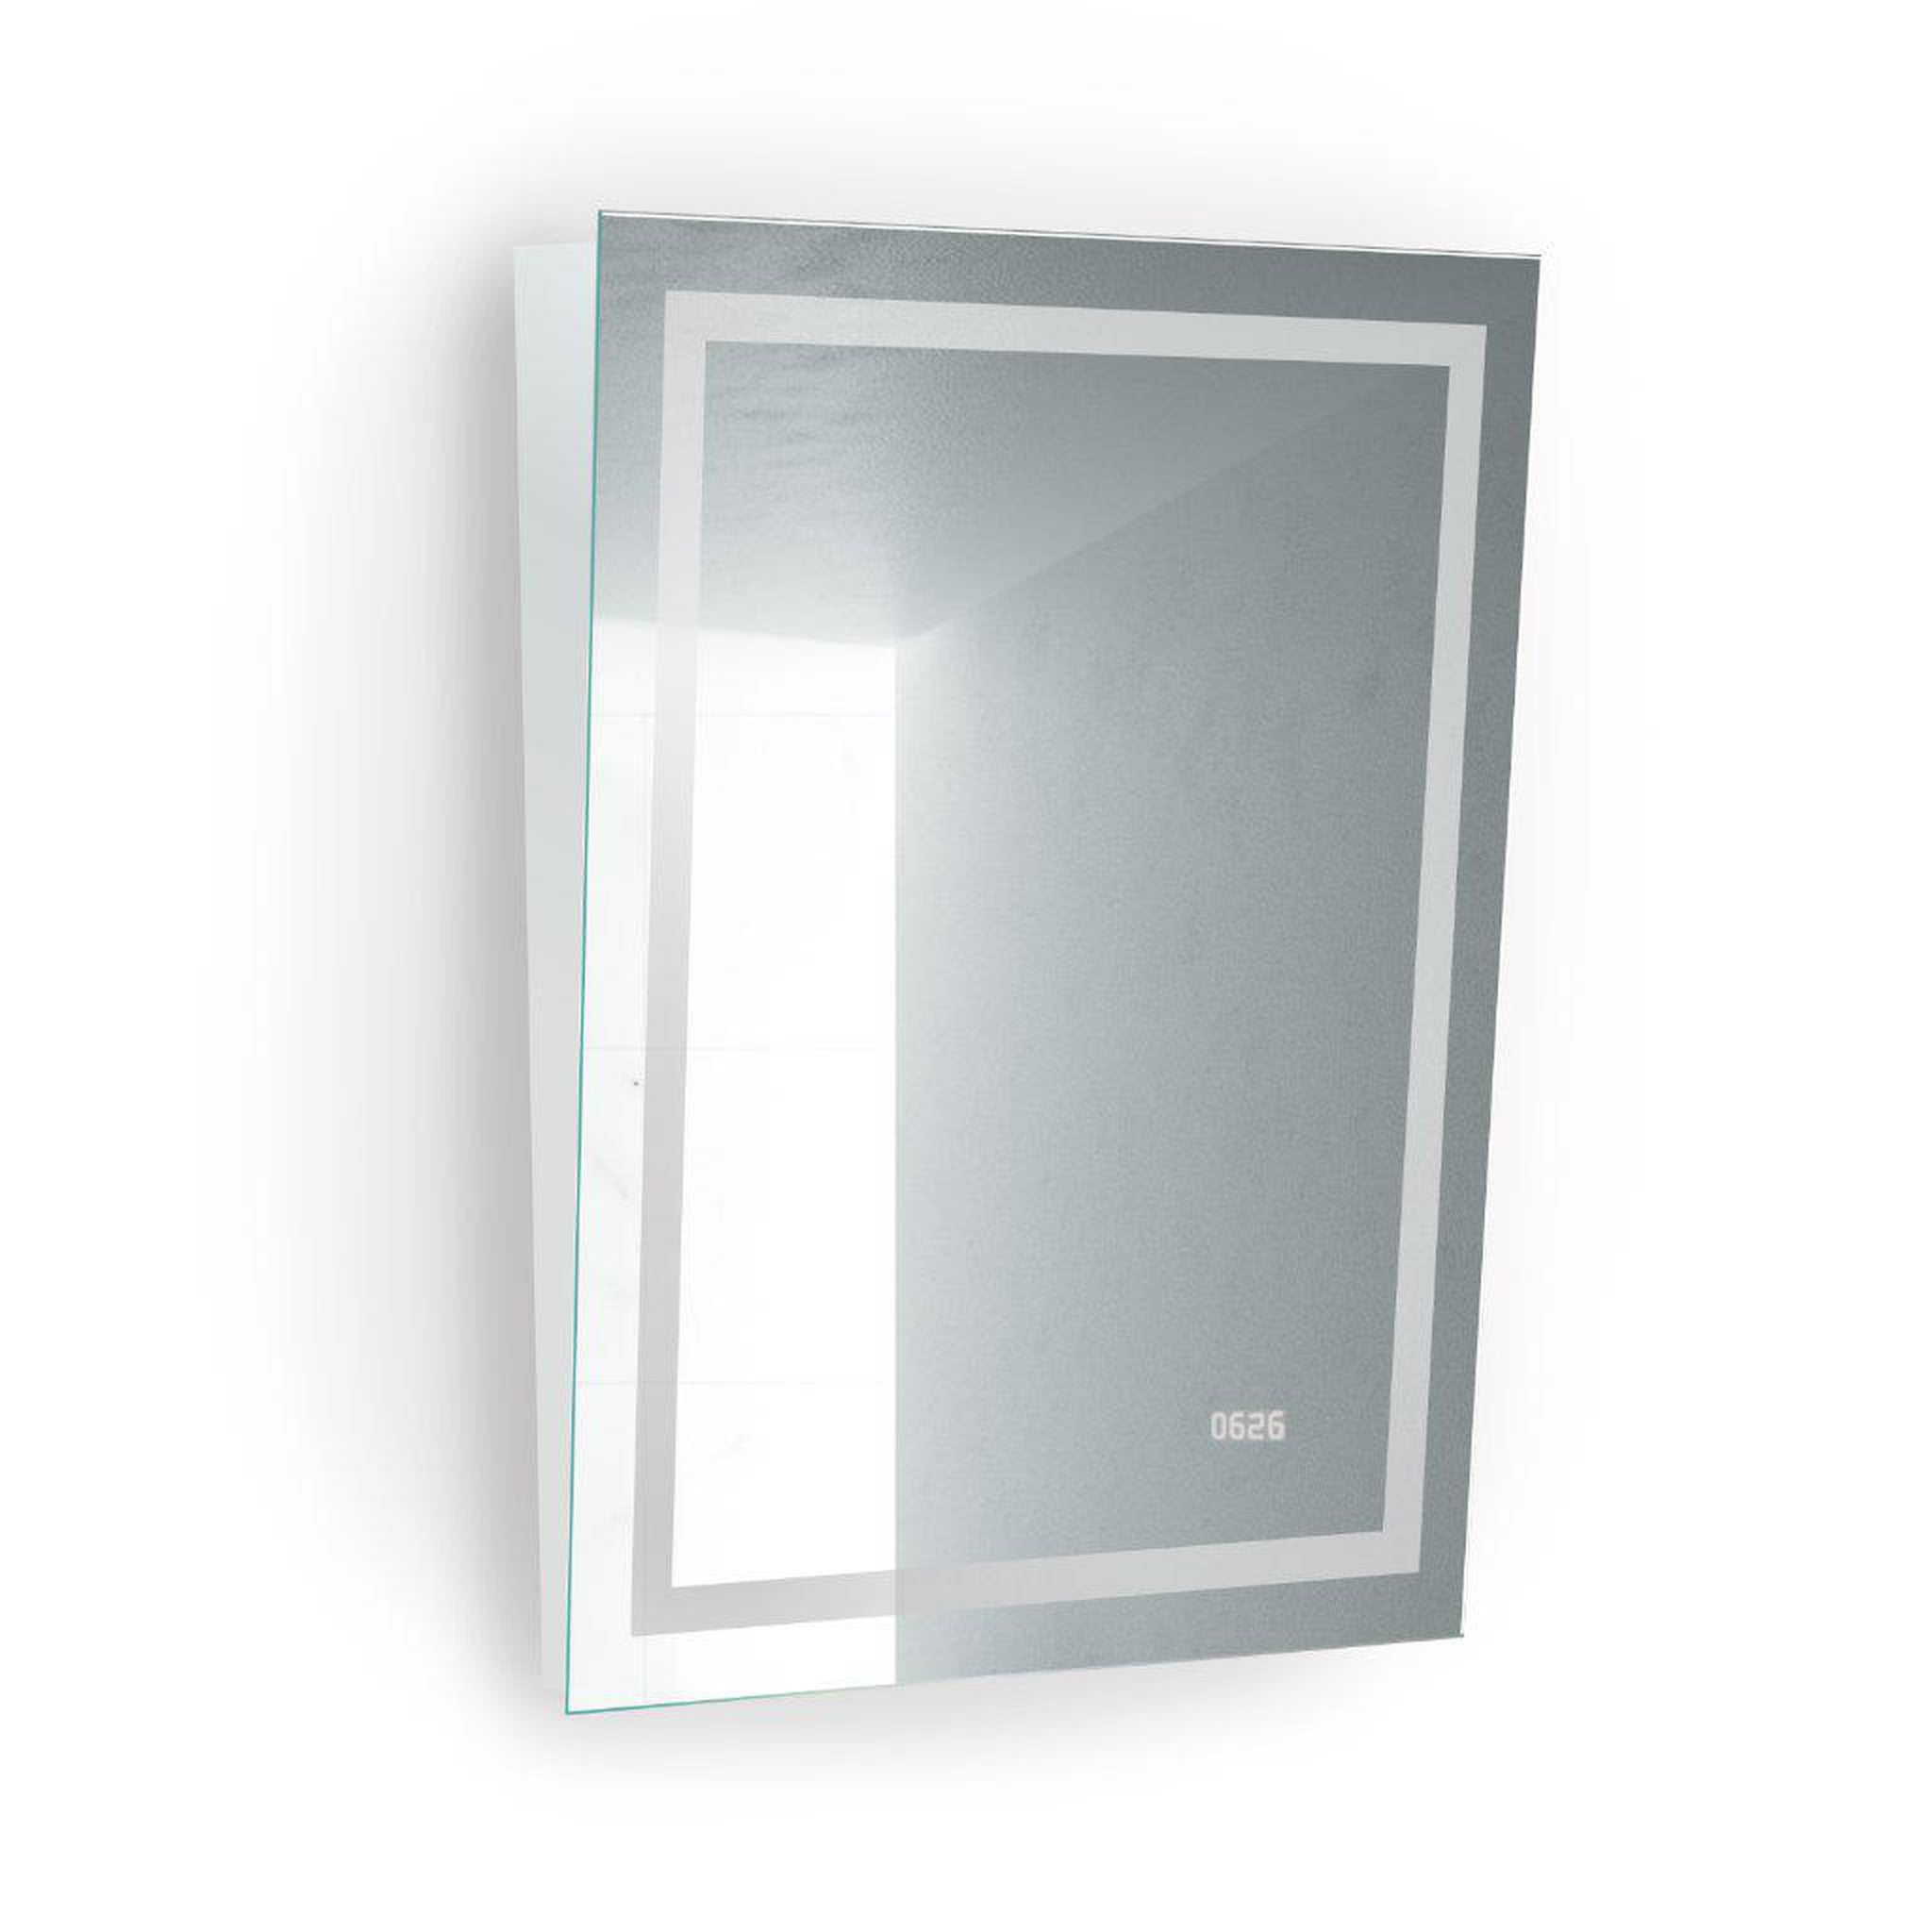 Krugg Reflections, Krugg Reflections Icon 24” x 32” 4000K Rectangular Tilted Wall-Mounted Illuminated Silver Backed LED Mirror With Built-in Defogger and Touch Sensor On/Off Built-in Dimmer